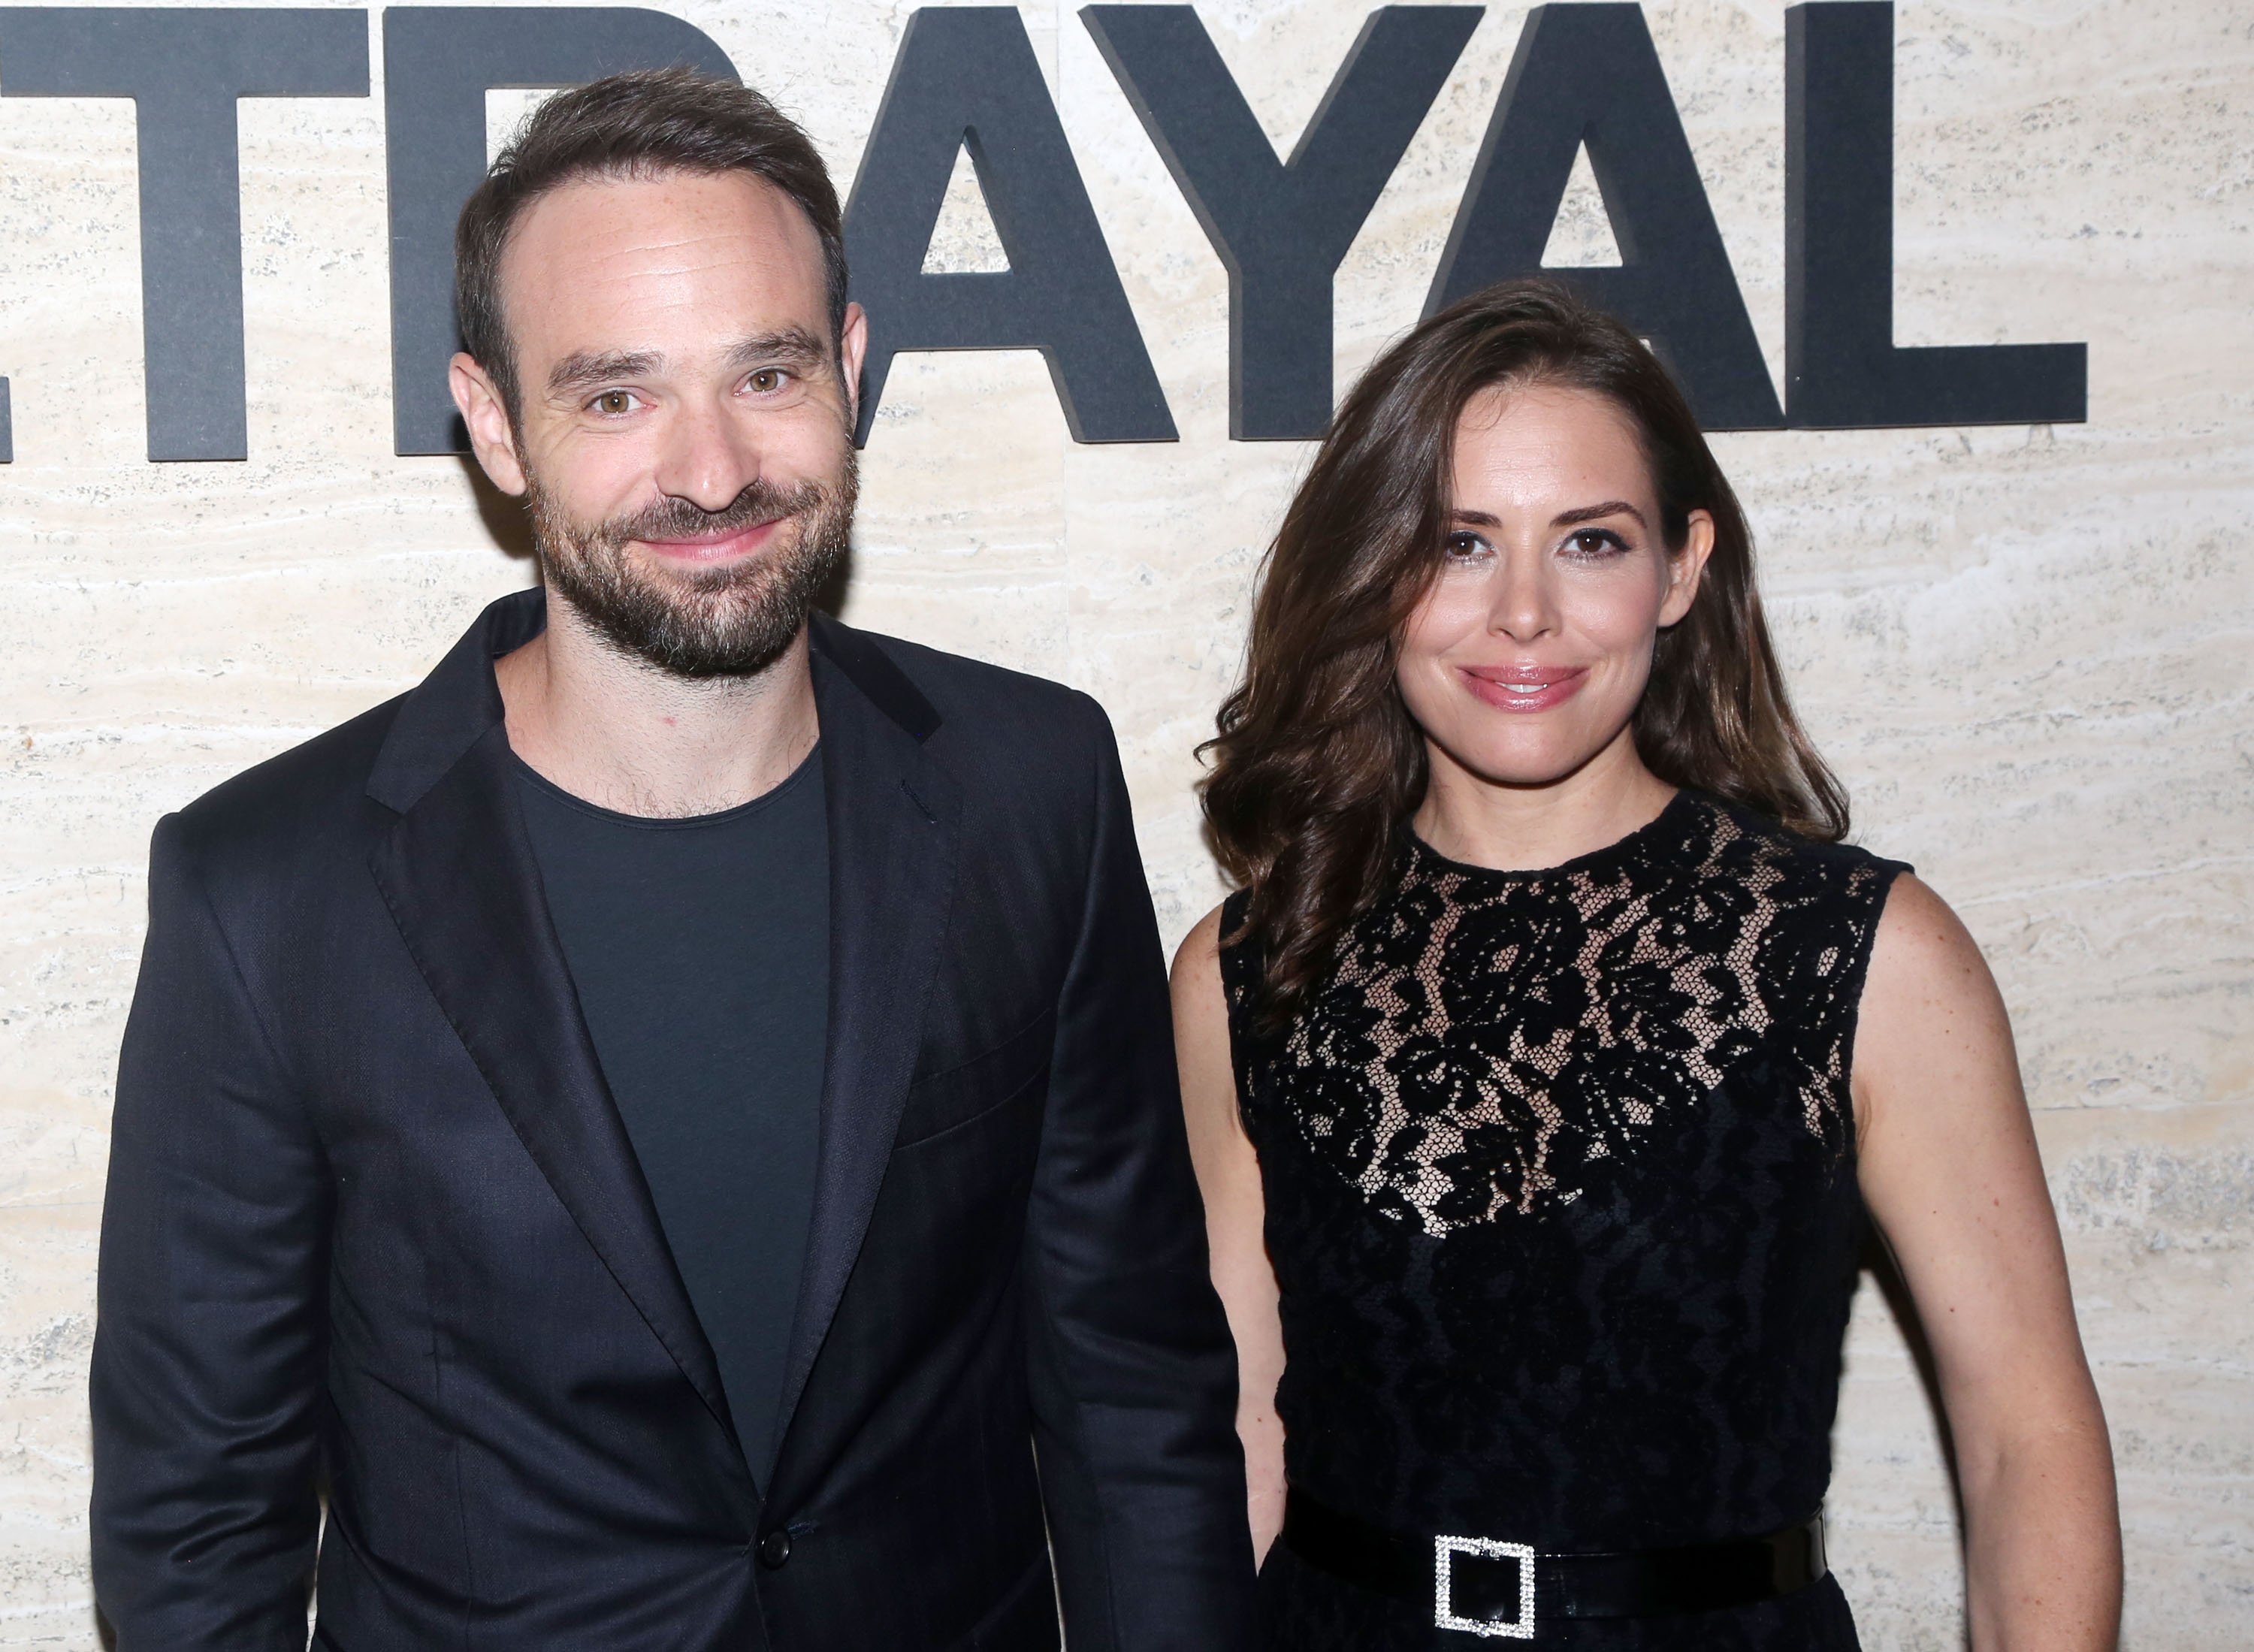 Charlie Cox and his wife Samantha Thomas at the opening night of "Betrayal" on Broadway on September 5, 2019 | Source: Getty Images